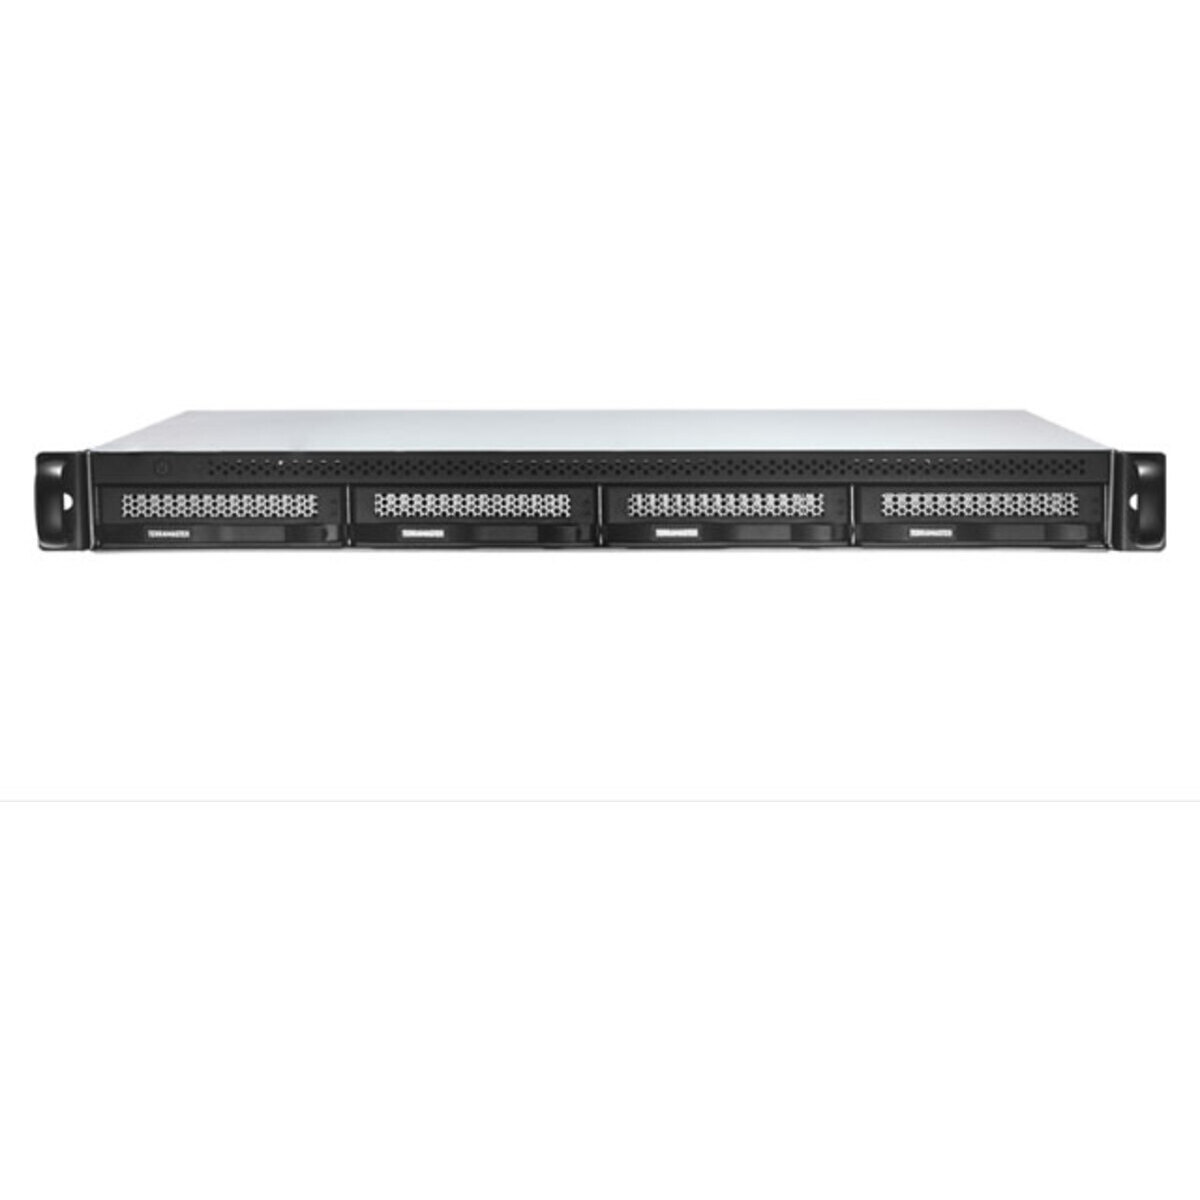 TerraMaster U4-423 48tb 4-Bay RackMount Multimedia / Power User / Business NAS - Network Attached Storage Device 3x16tb Seagate IronWolf ST16000VN001 3.5 7200rpm SATA 6Gb/s HDD NAS Class Drives Installed - Burn-In Tested - FREE RAM UPGRADE U4-423